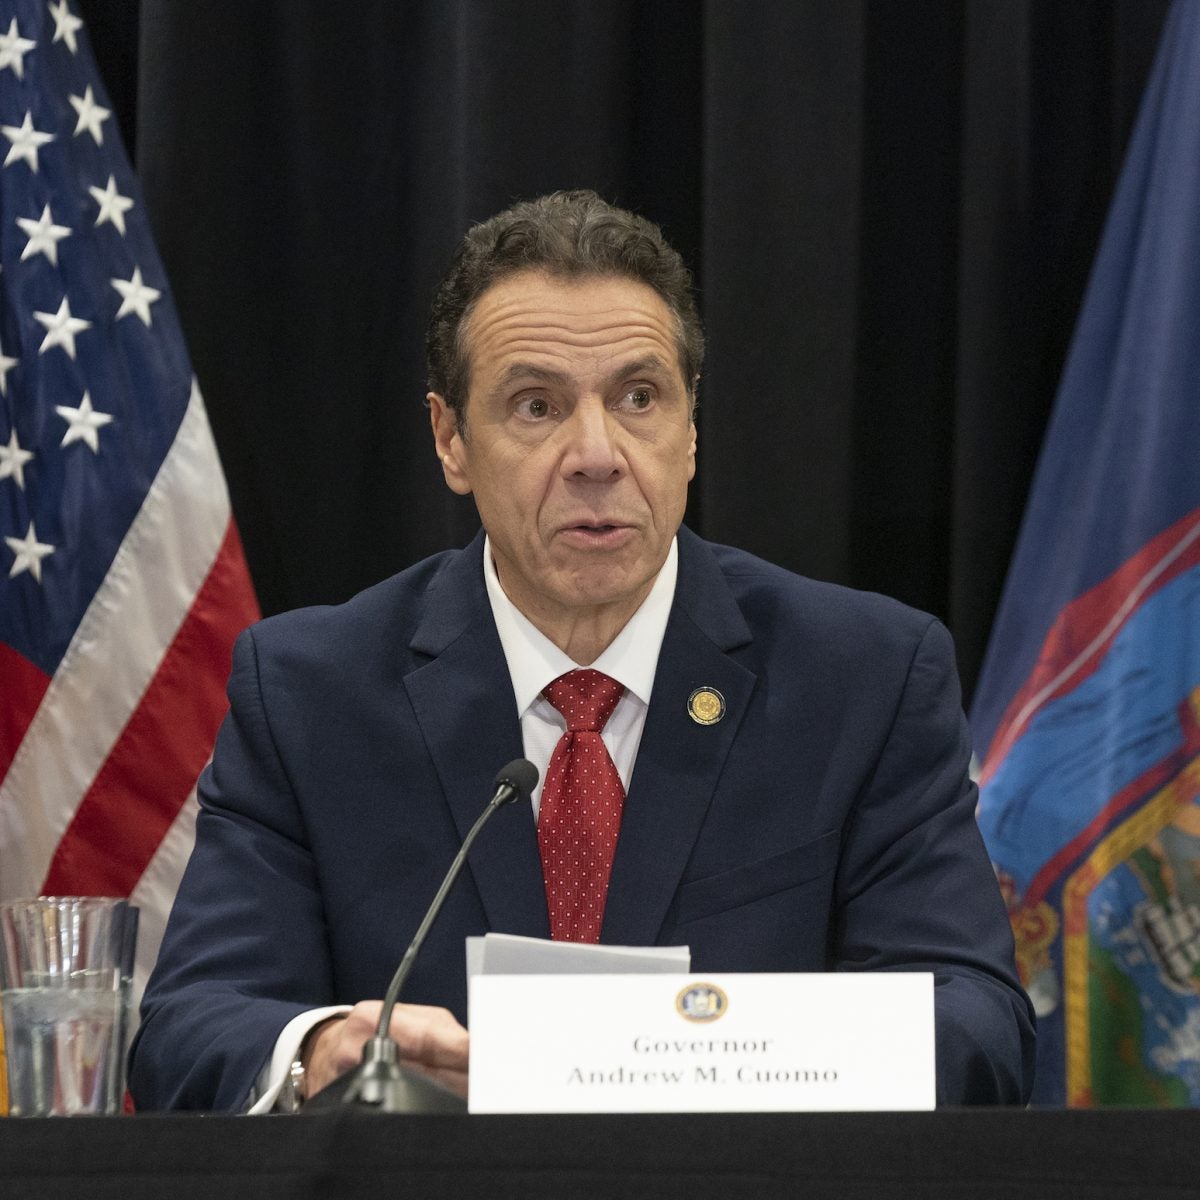 New York Governor Andrew Cuomo Accused Of Sexual Harassment